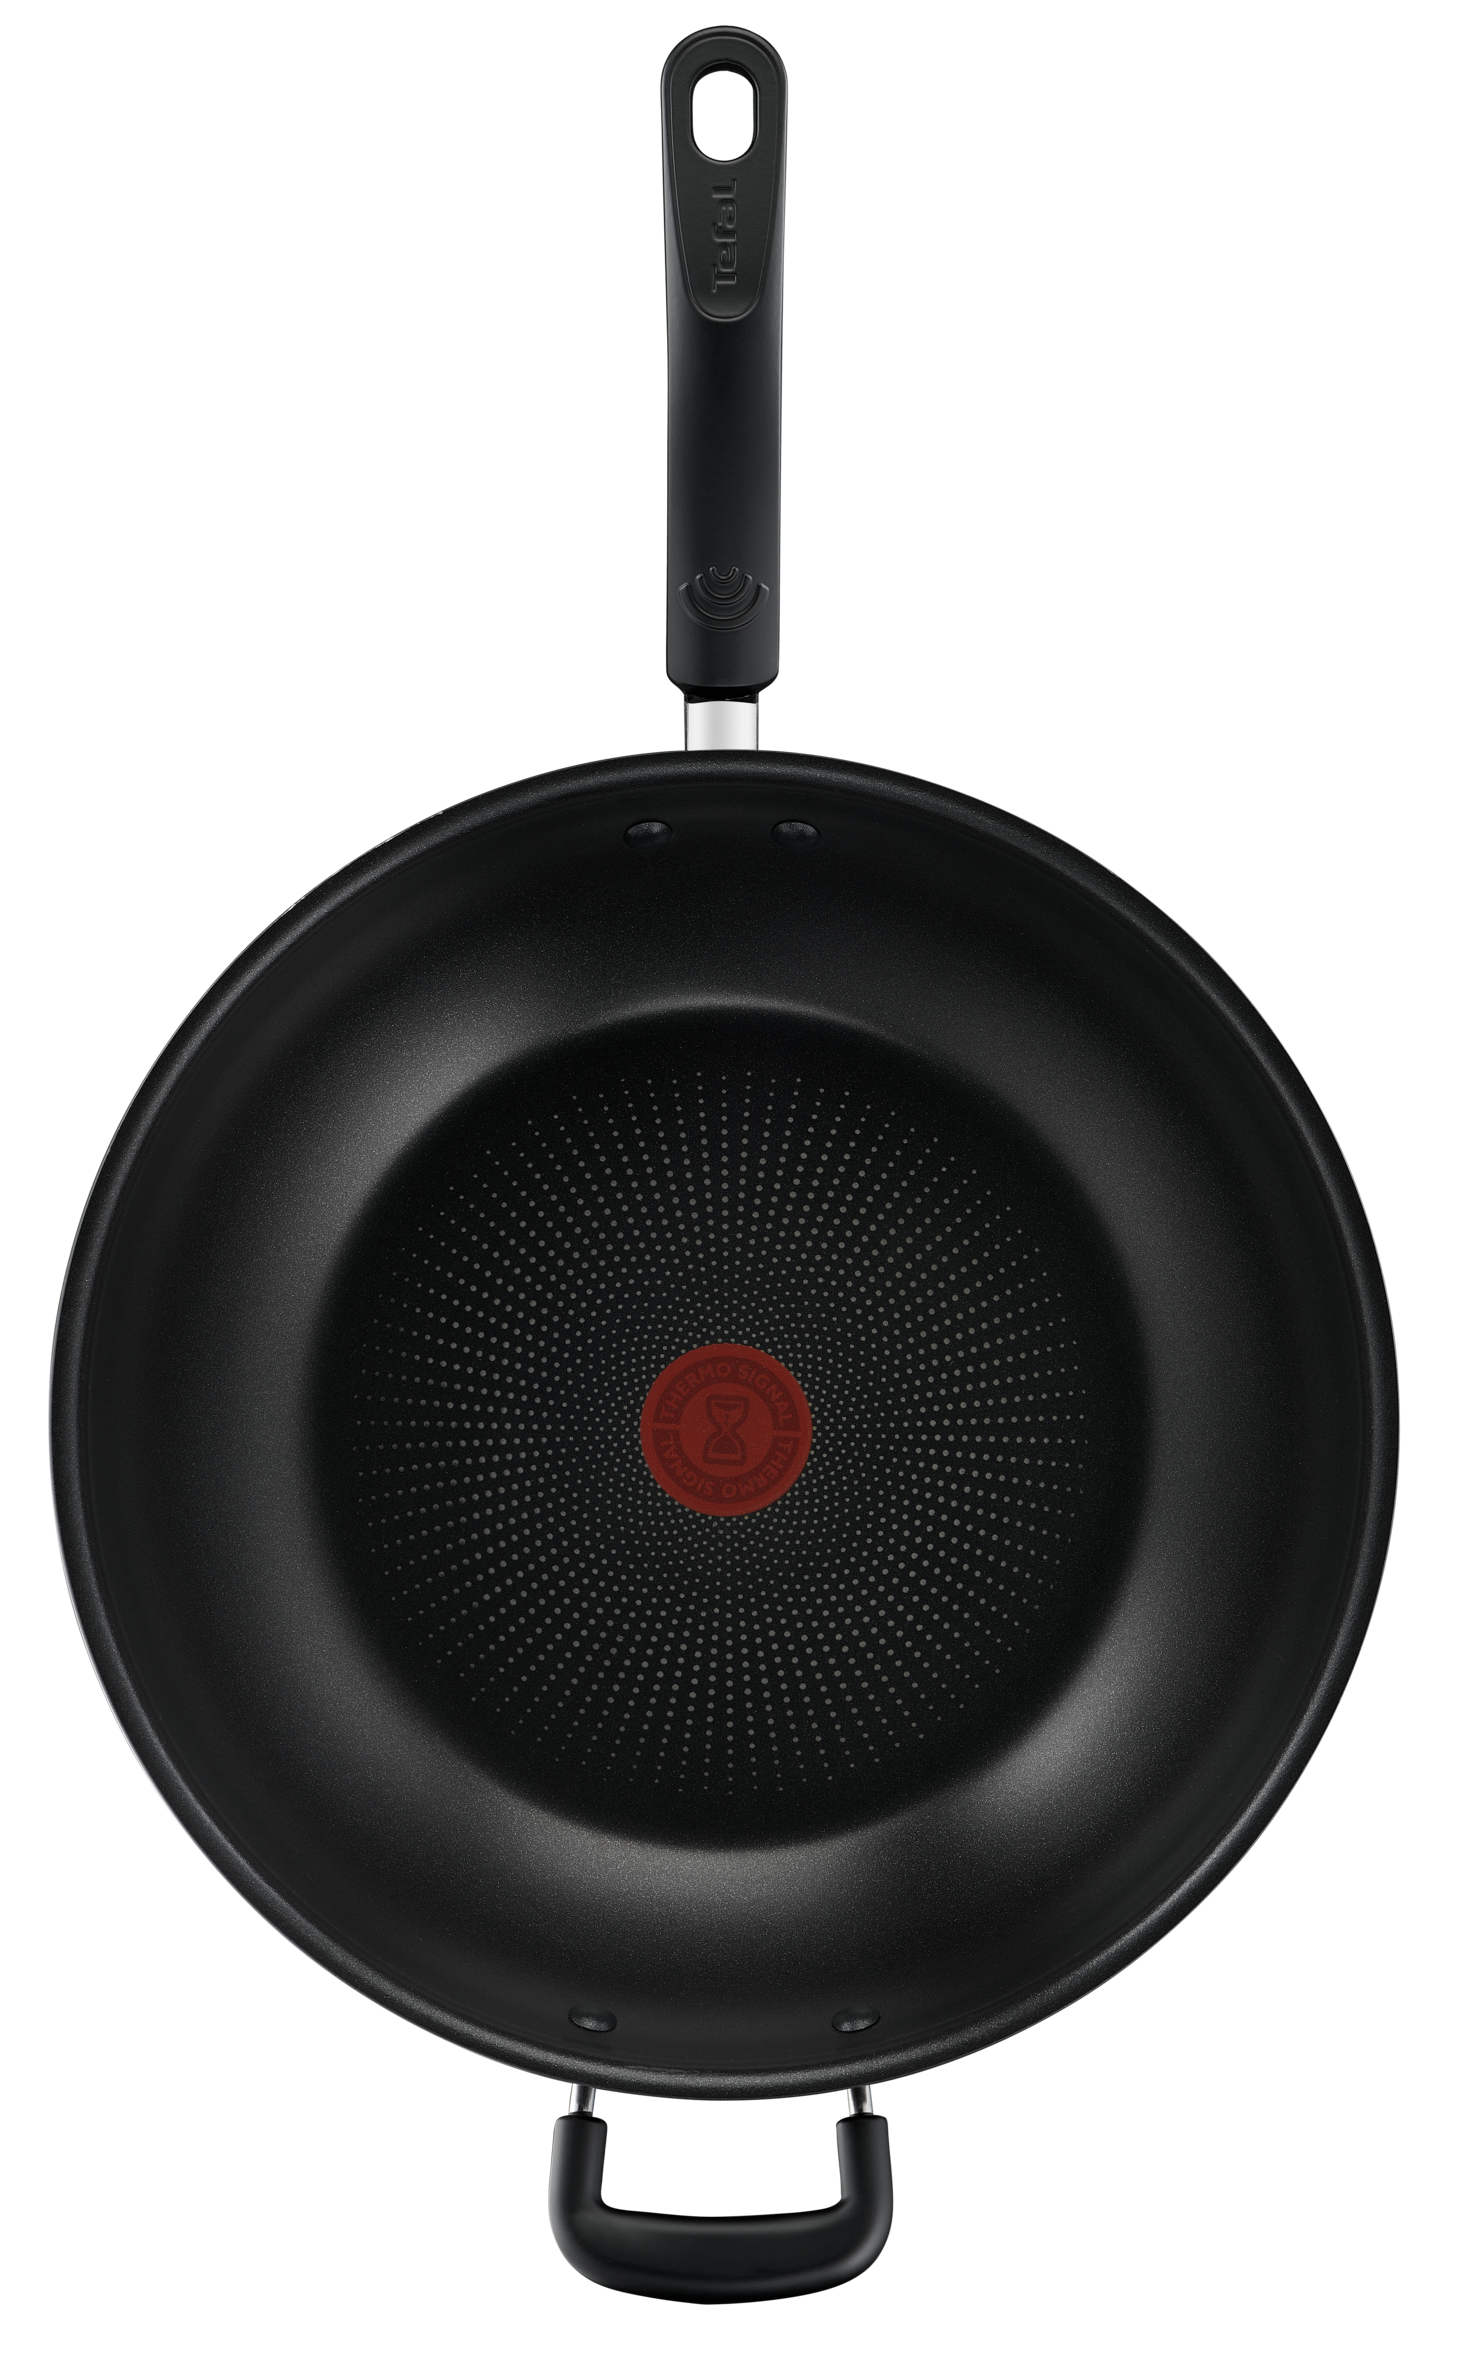 Tefal Specialty Hard Anodised Non-Stick Wok 32cm + Lid